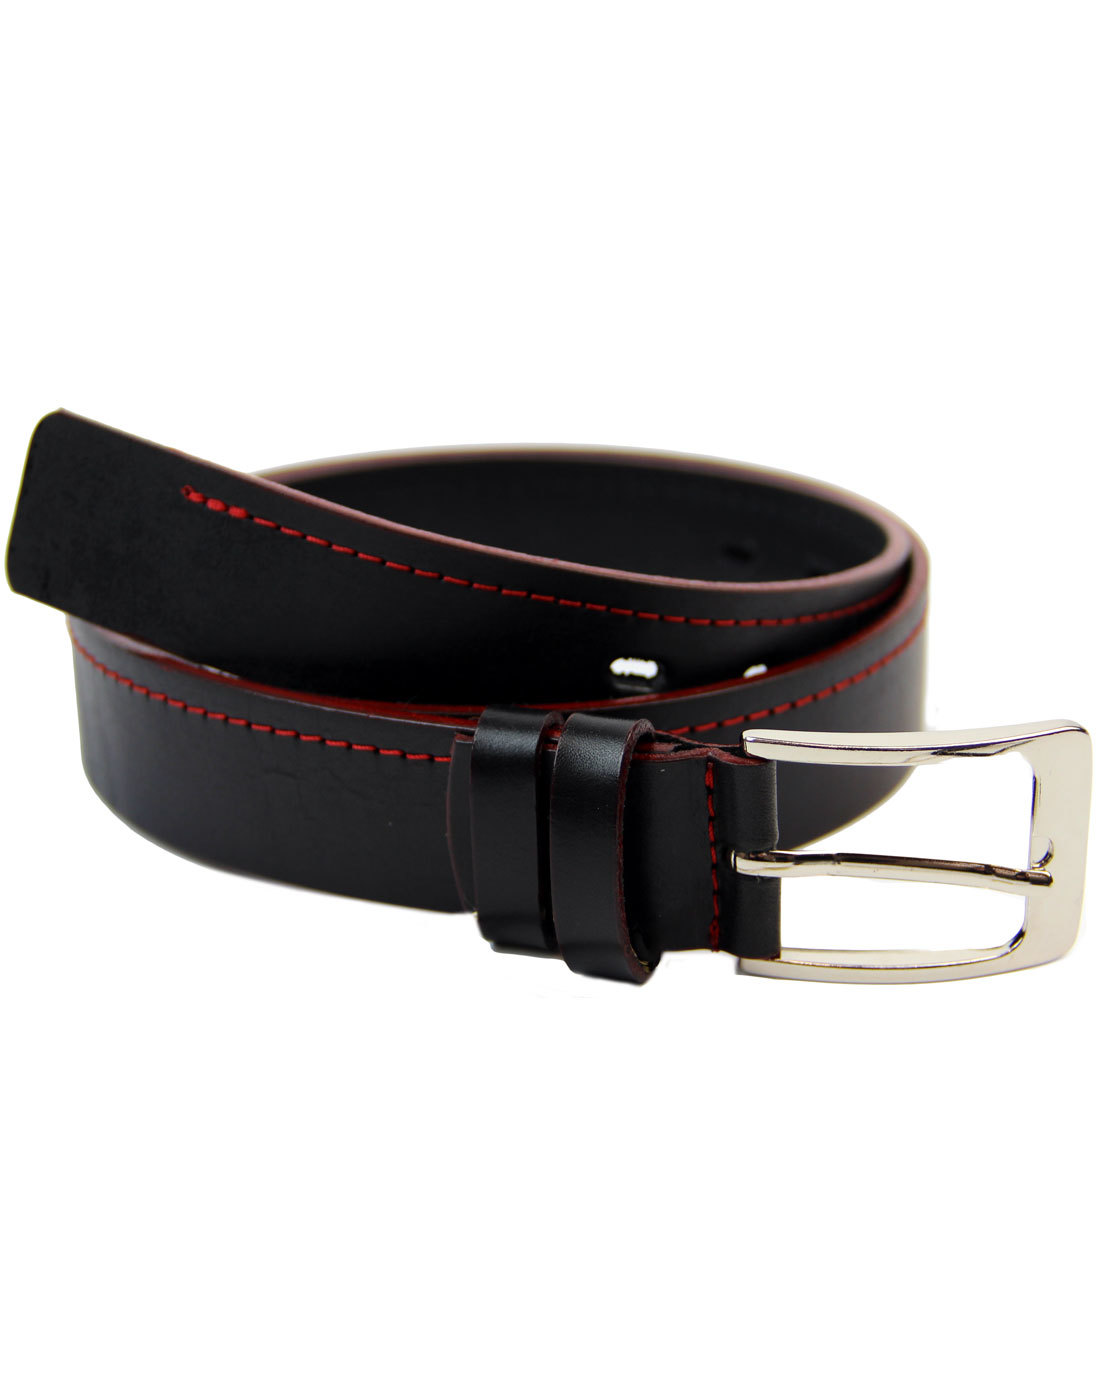 LACUZZO Retro Indie Mod Red Stitch Leather Belt